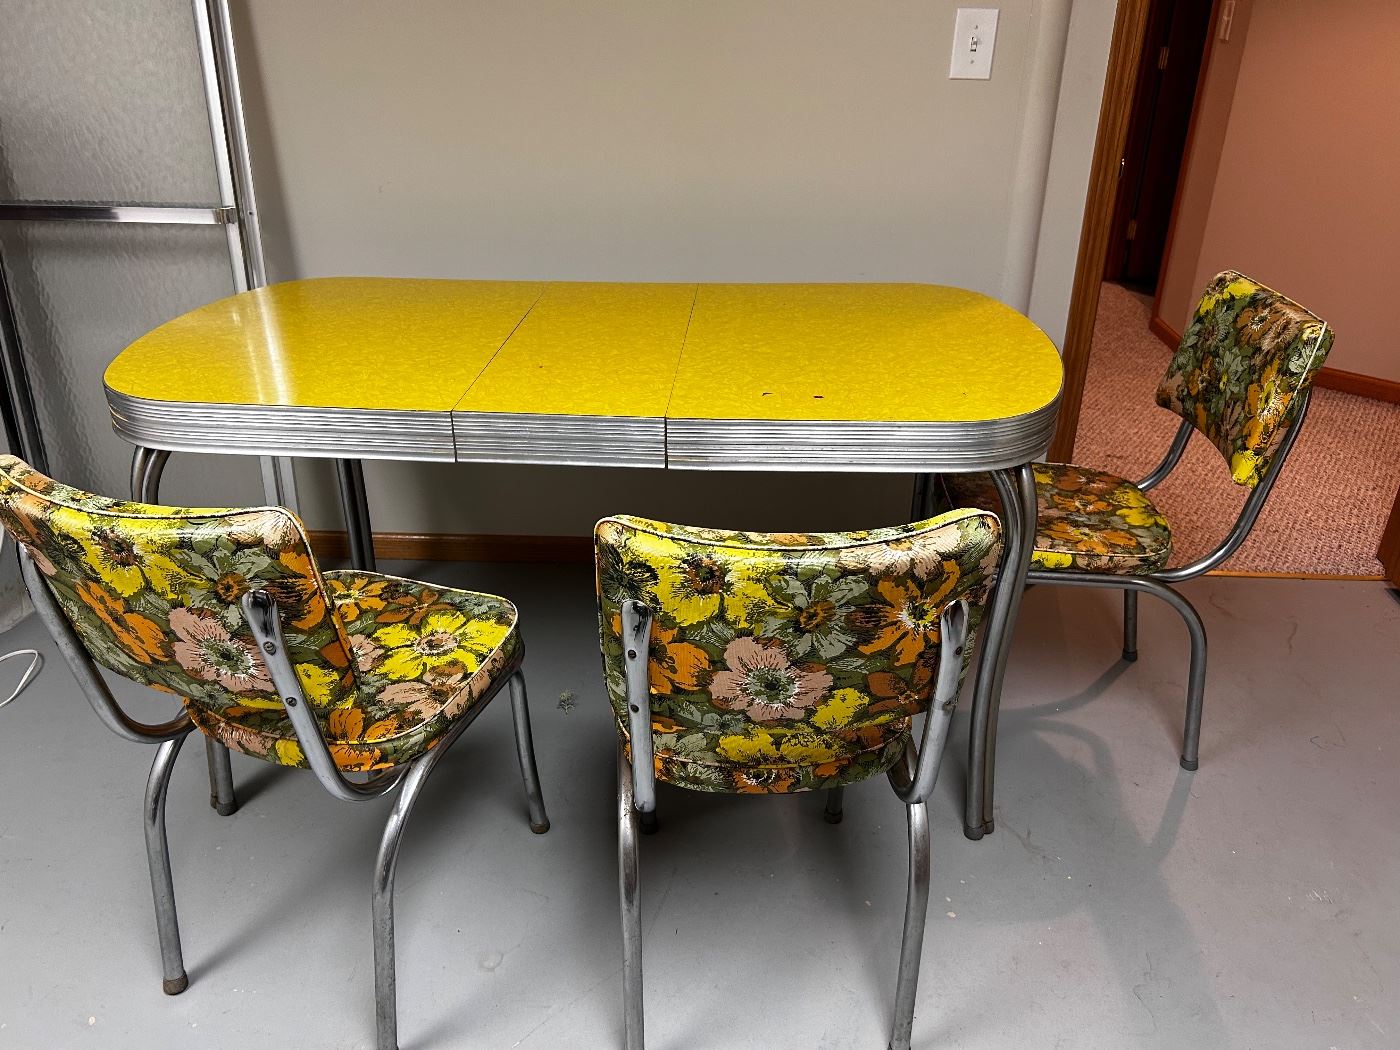 We have 3 chairs for this mid century table.